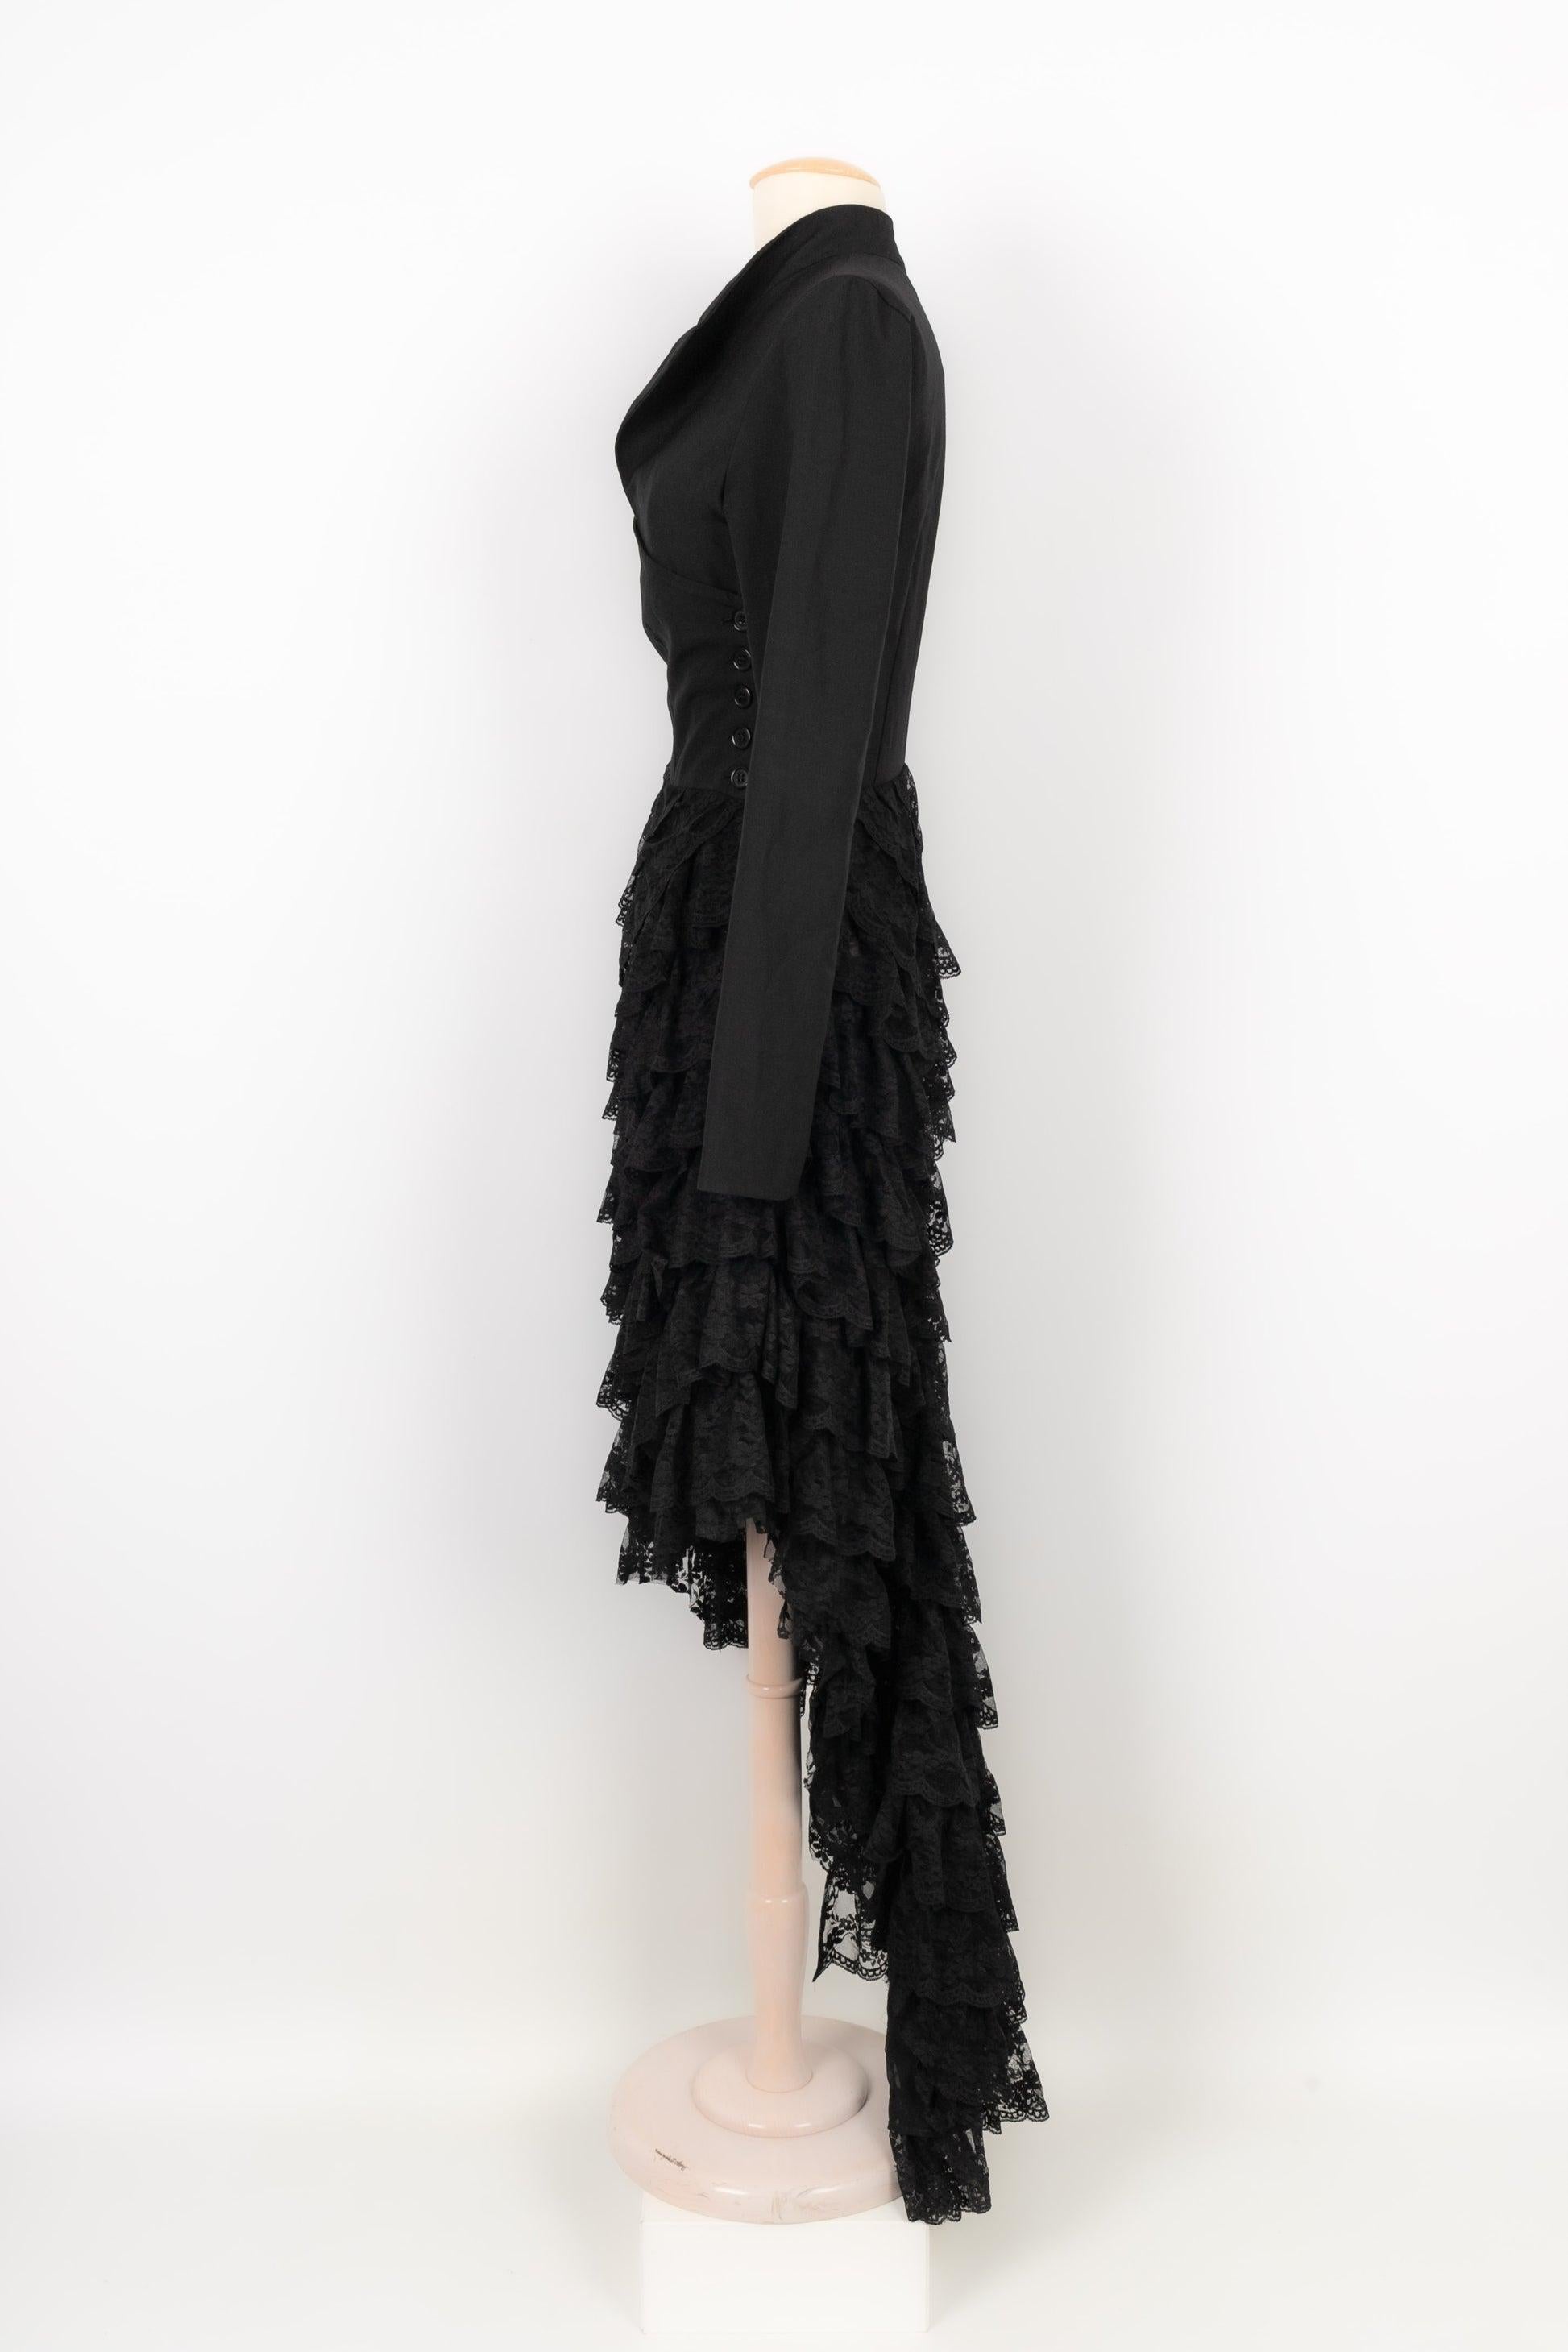 Alexander Mcqueen - (Made in Italy) Asymmetrical dress in black wool crepe and layered scalloped pleated lace. Row of buttons on the left side to the waist. Train style. No size label, it fits a 38FR. Spring-Summer 1999 Collection.

Additional